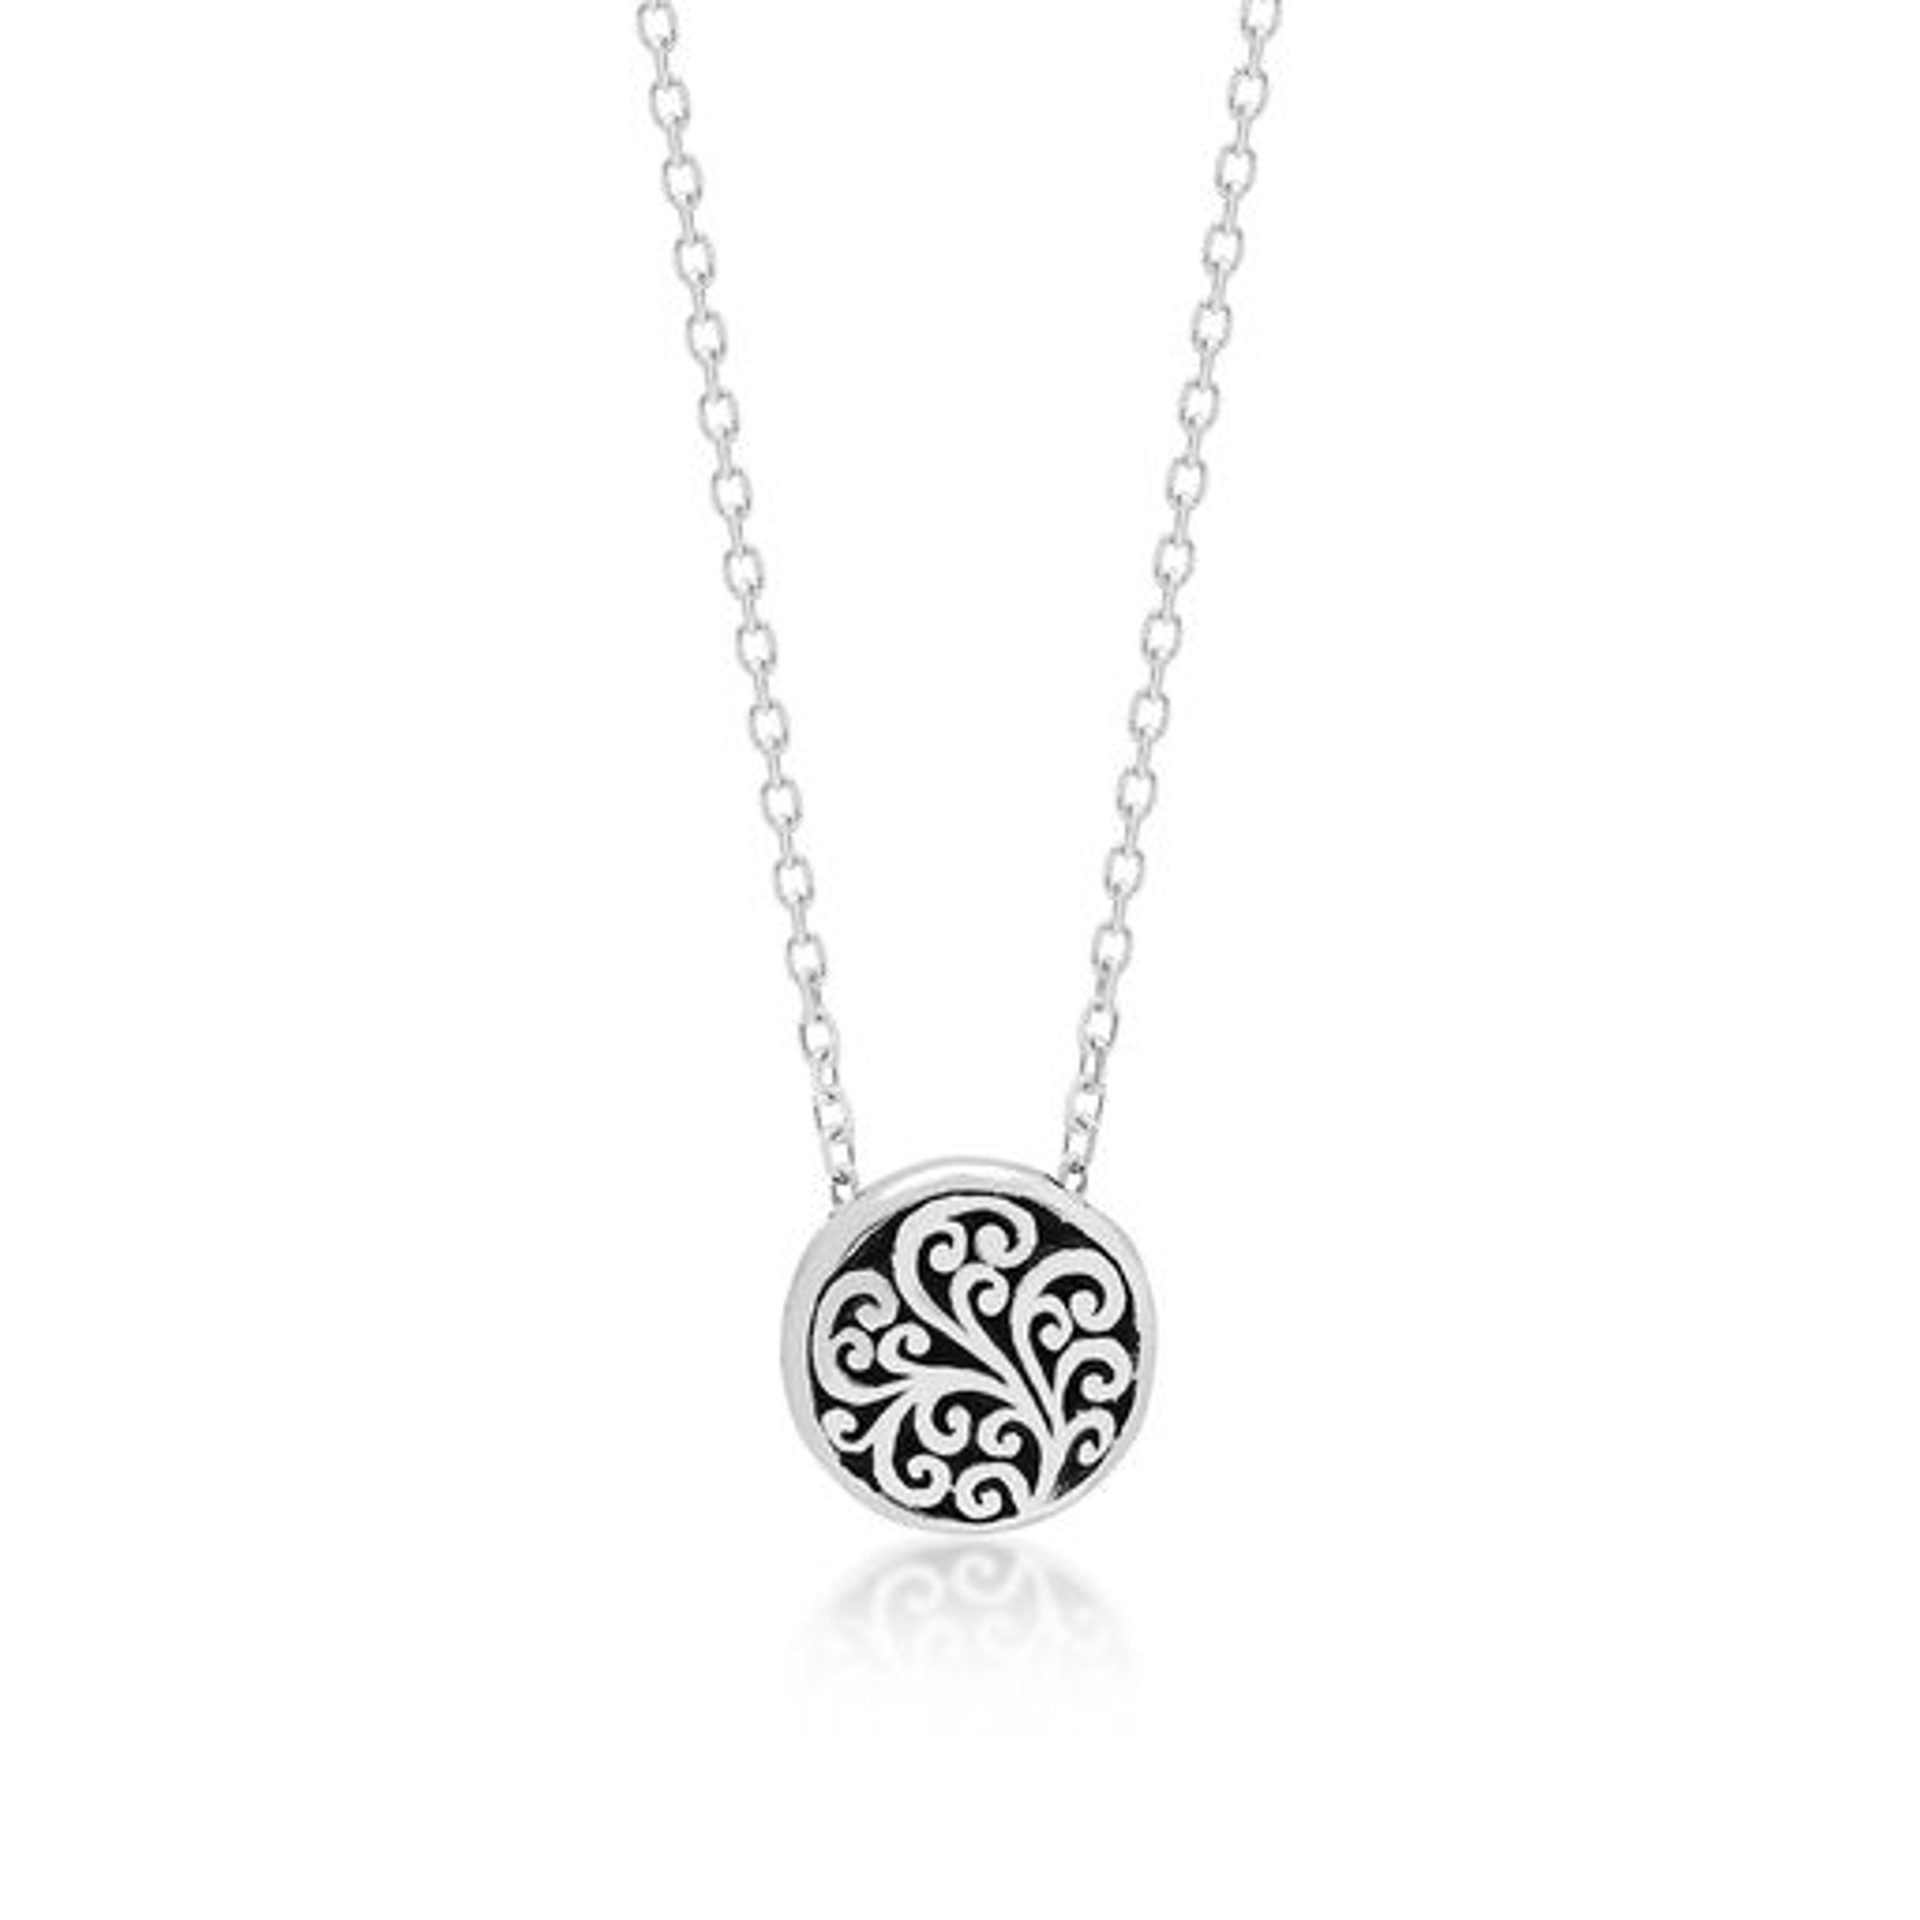 6990 Signature Scroll Circle Pendant Necklace by Lois Hill